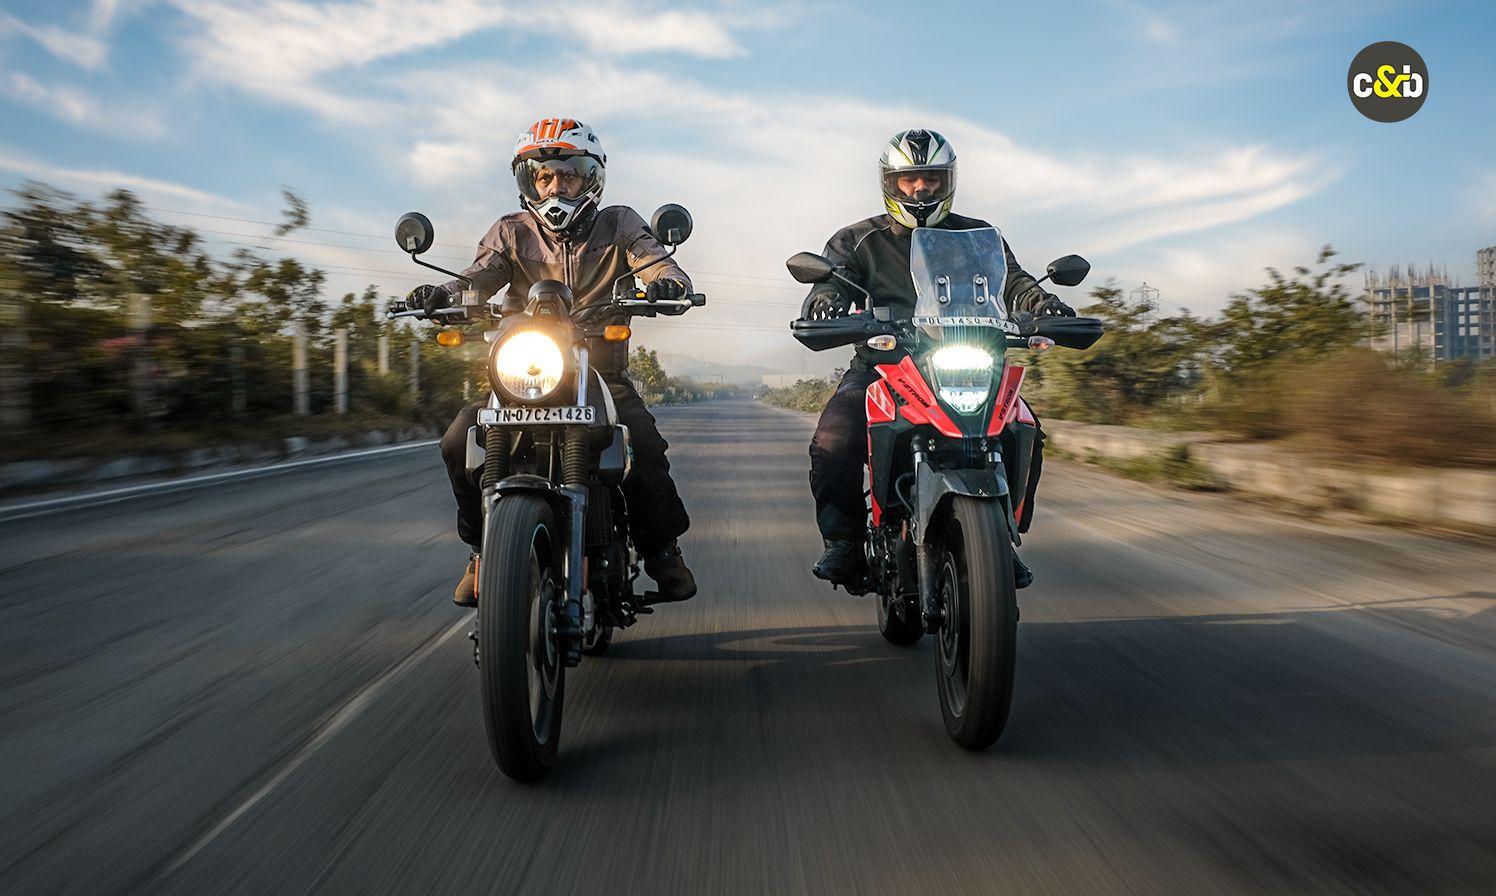 Two different bikes, one a retro-styled scrambler and the other, an entry-level adventure tourer. The Suzuki V-Strom SX takes on the Royal Enfield Scram 411 in this road and trail comparison!